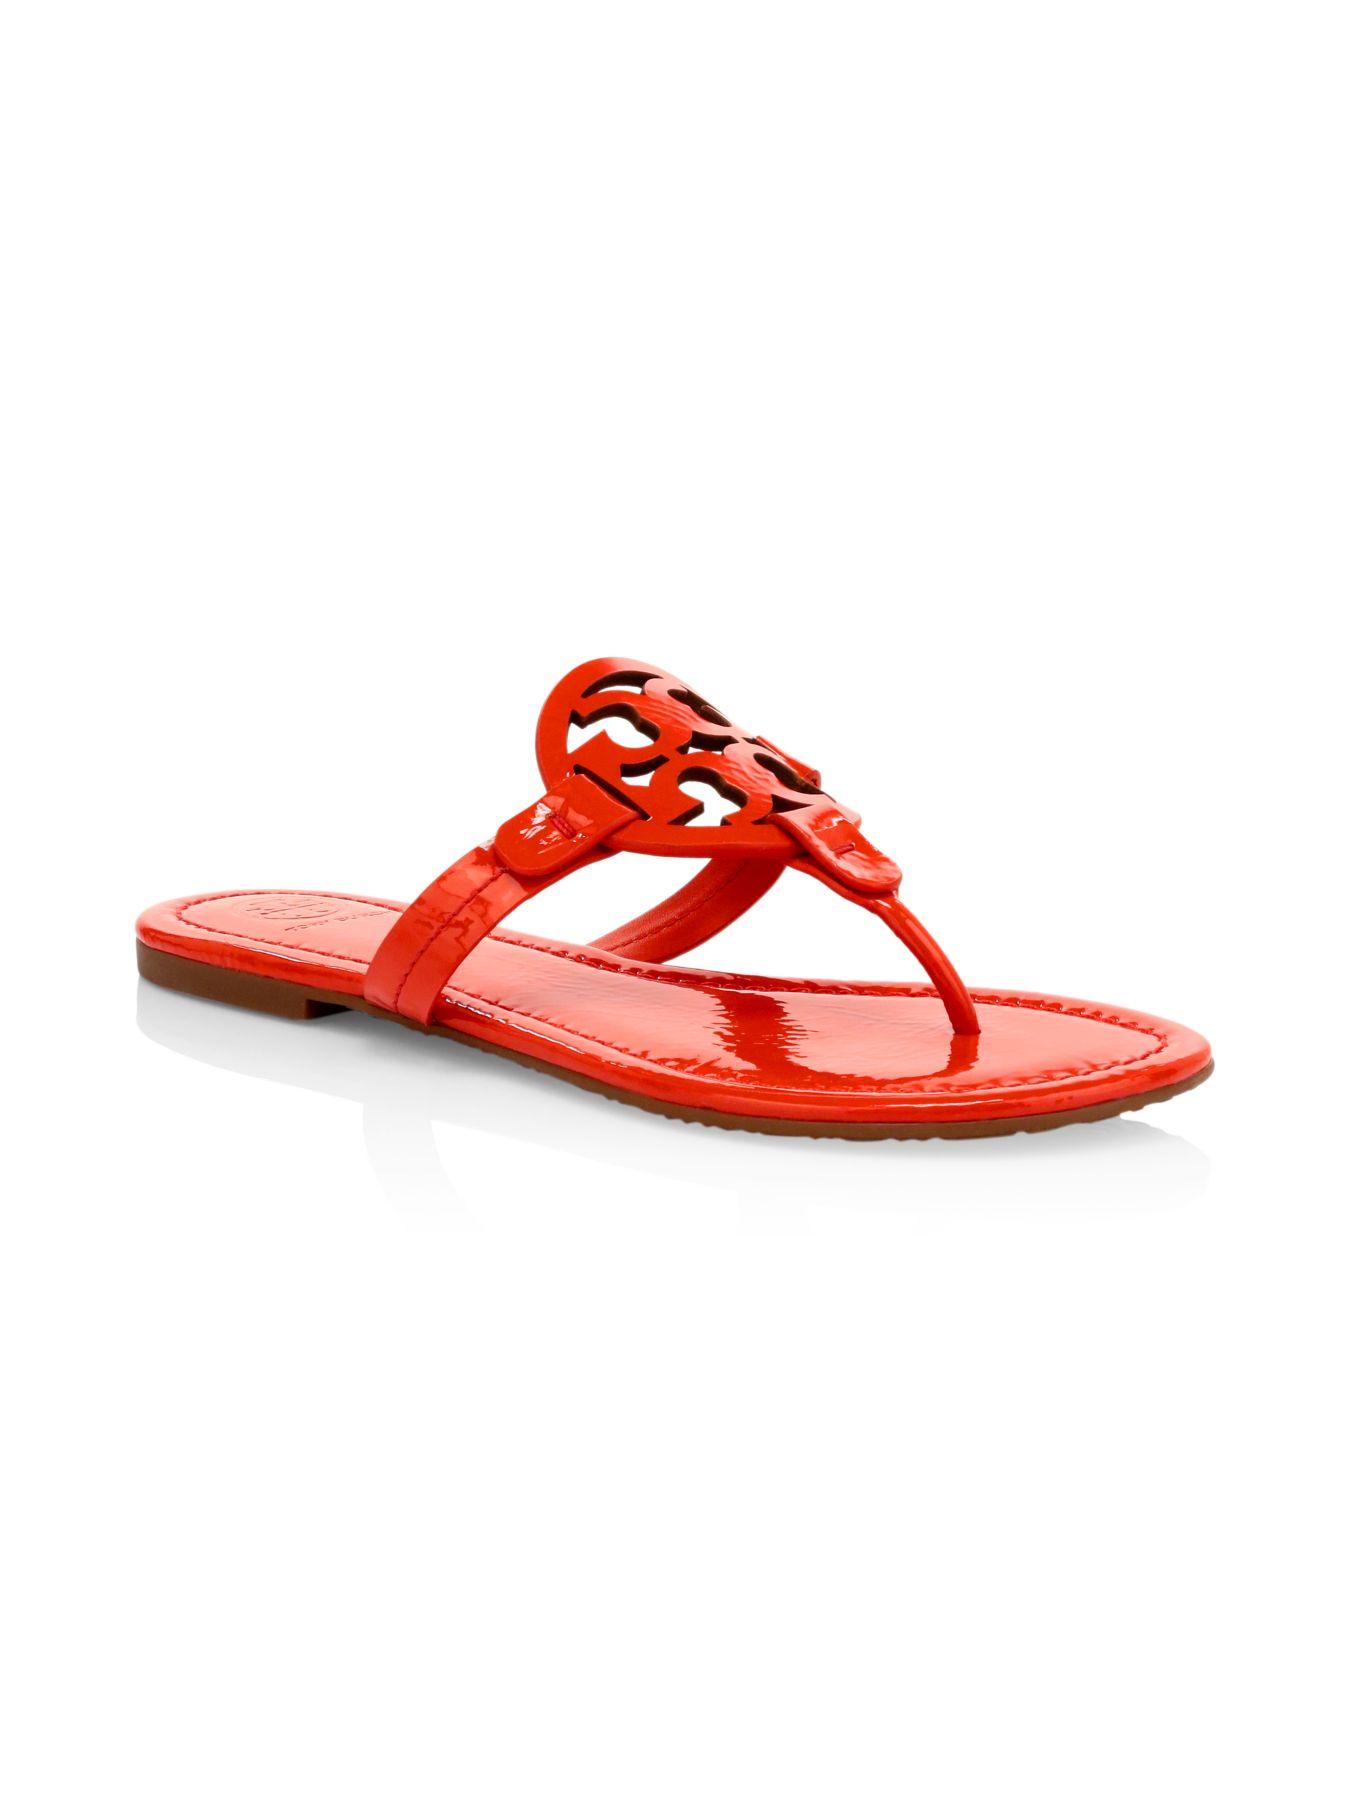 red tory burch sandals